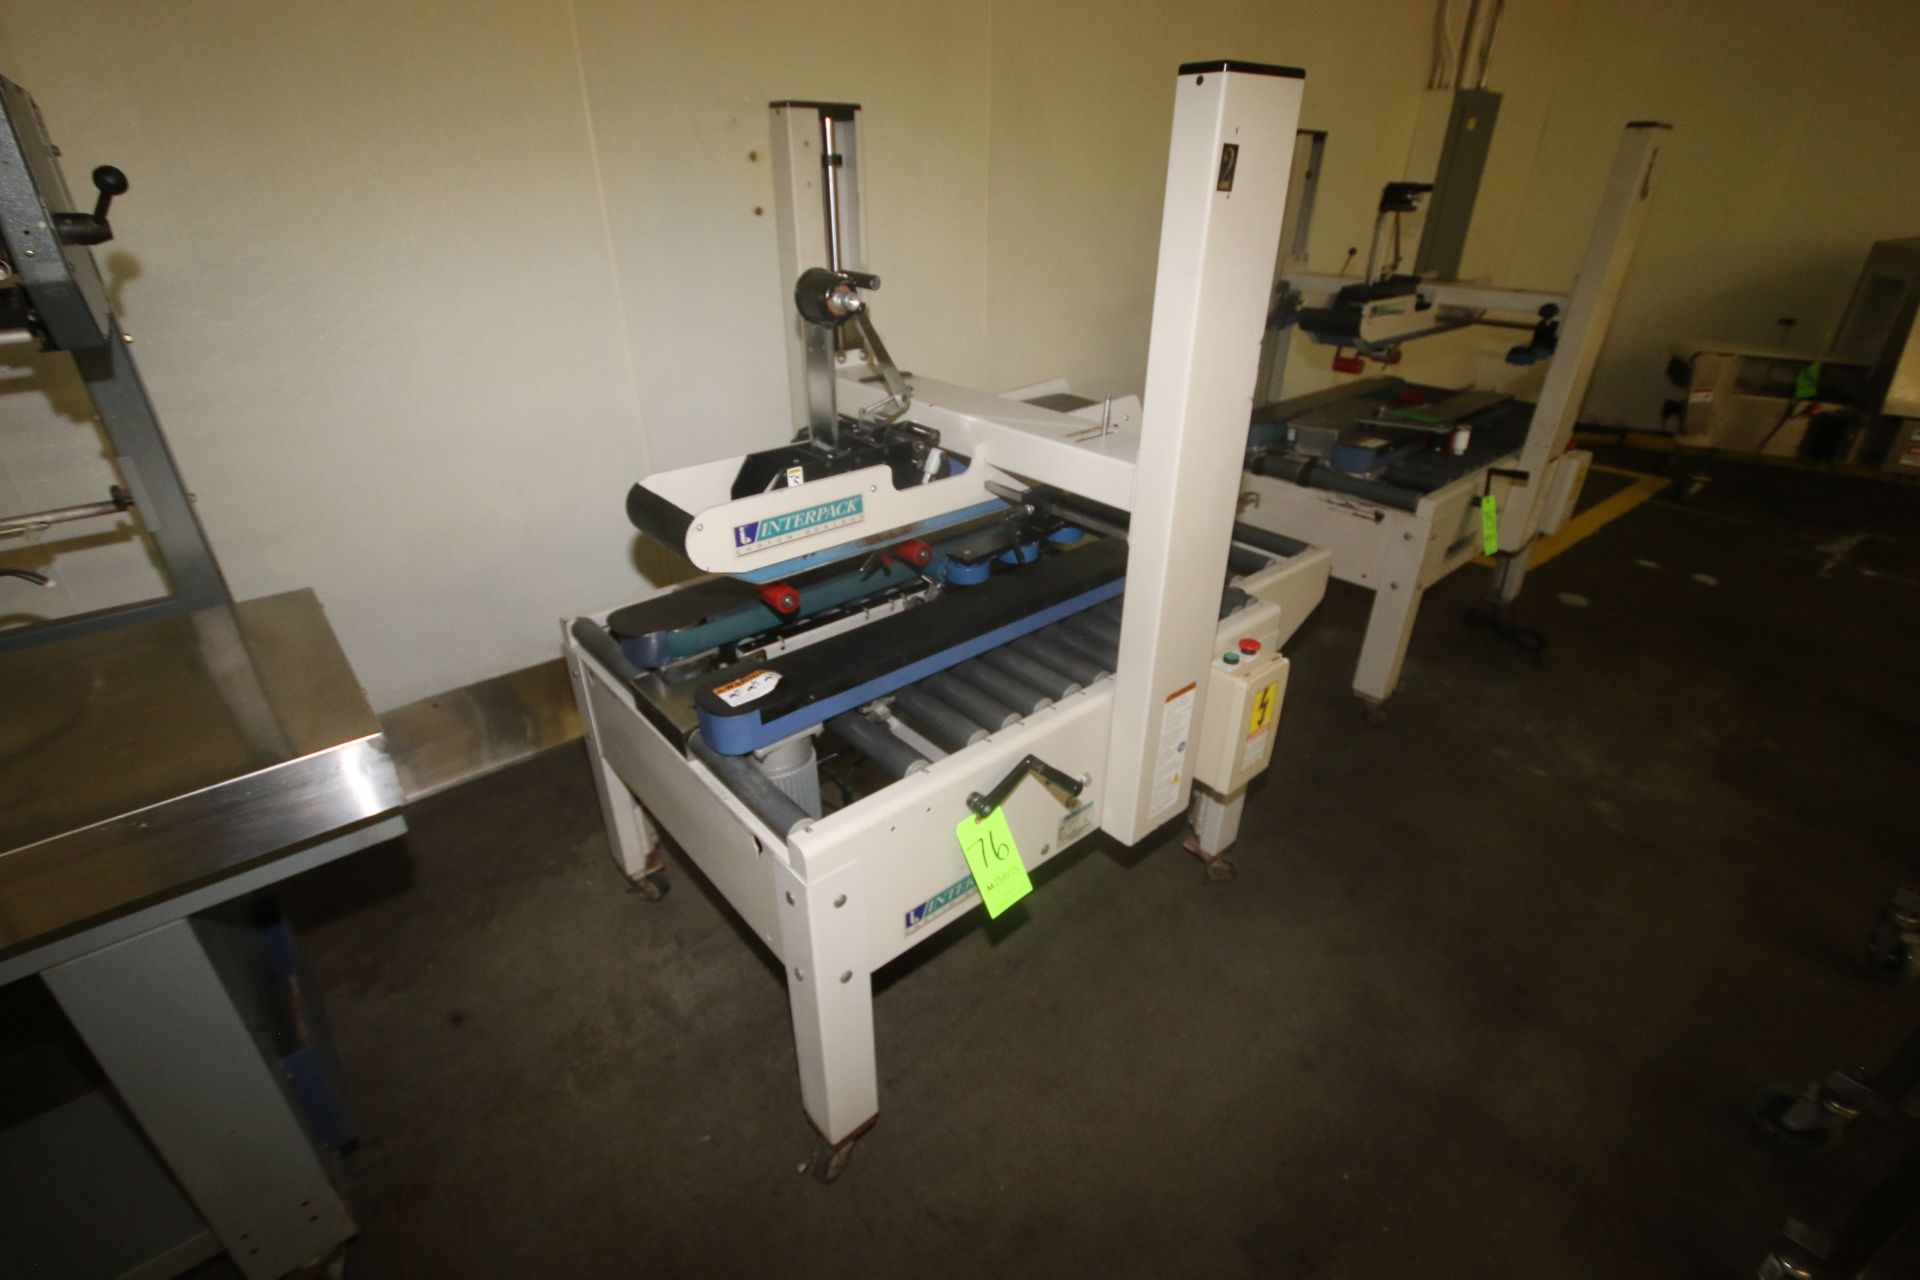 InterPack Top & Bottom Case Sealer, M/N USA 2024-SB/3, S/N H03 T544 007, 115 Volts, 1 Phase, with